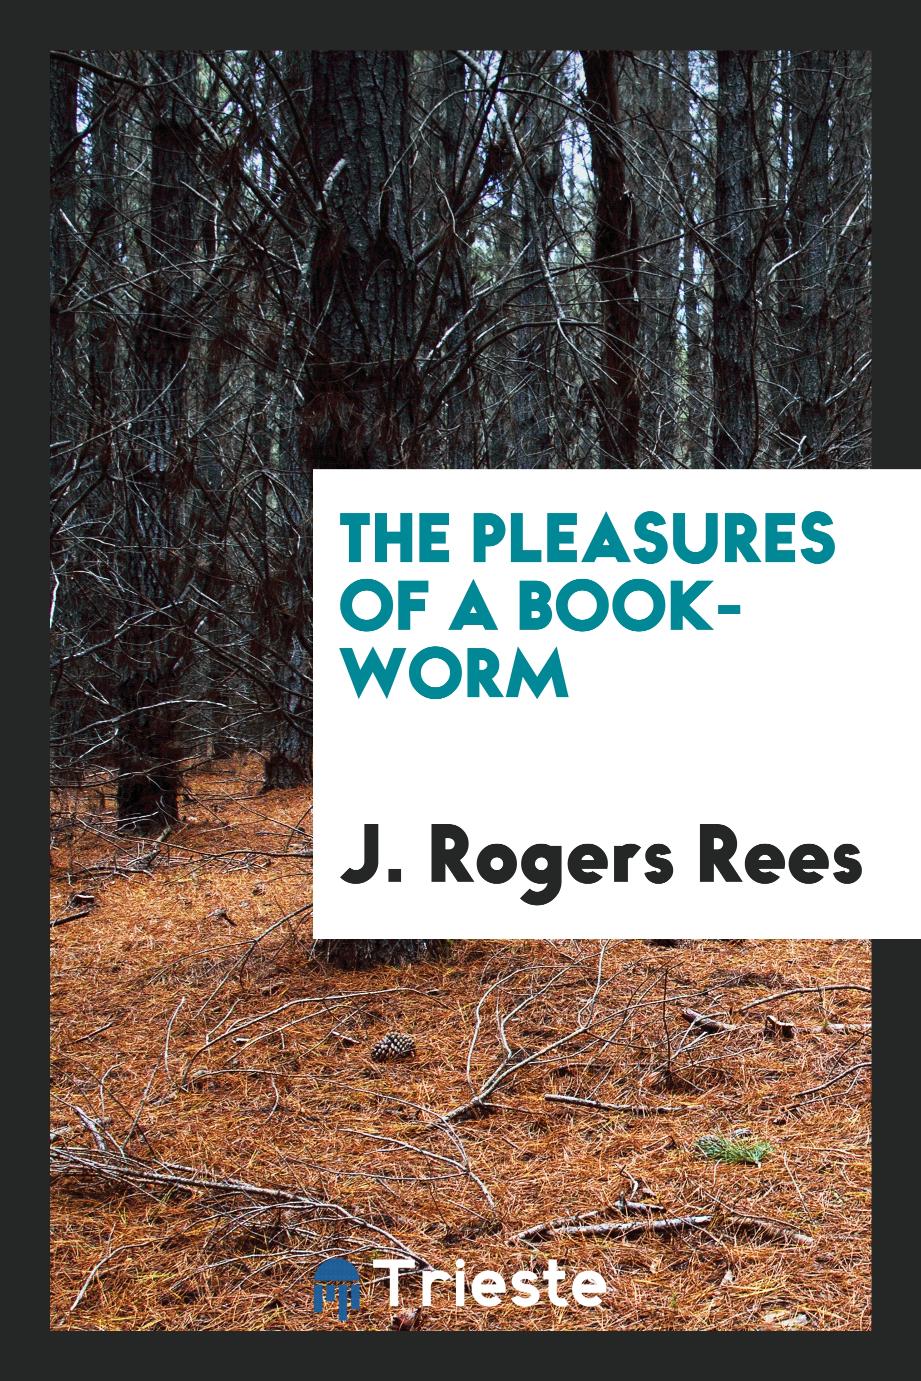 The pleasures of a book-worm